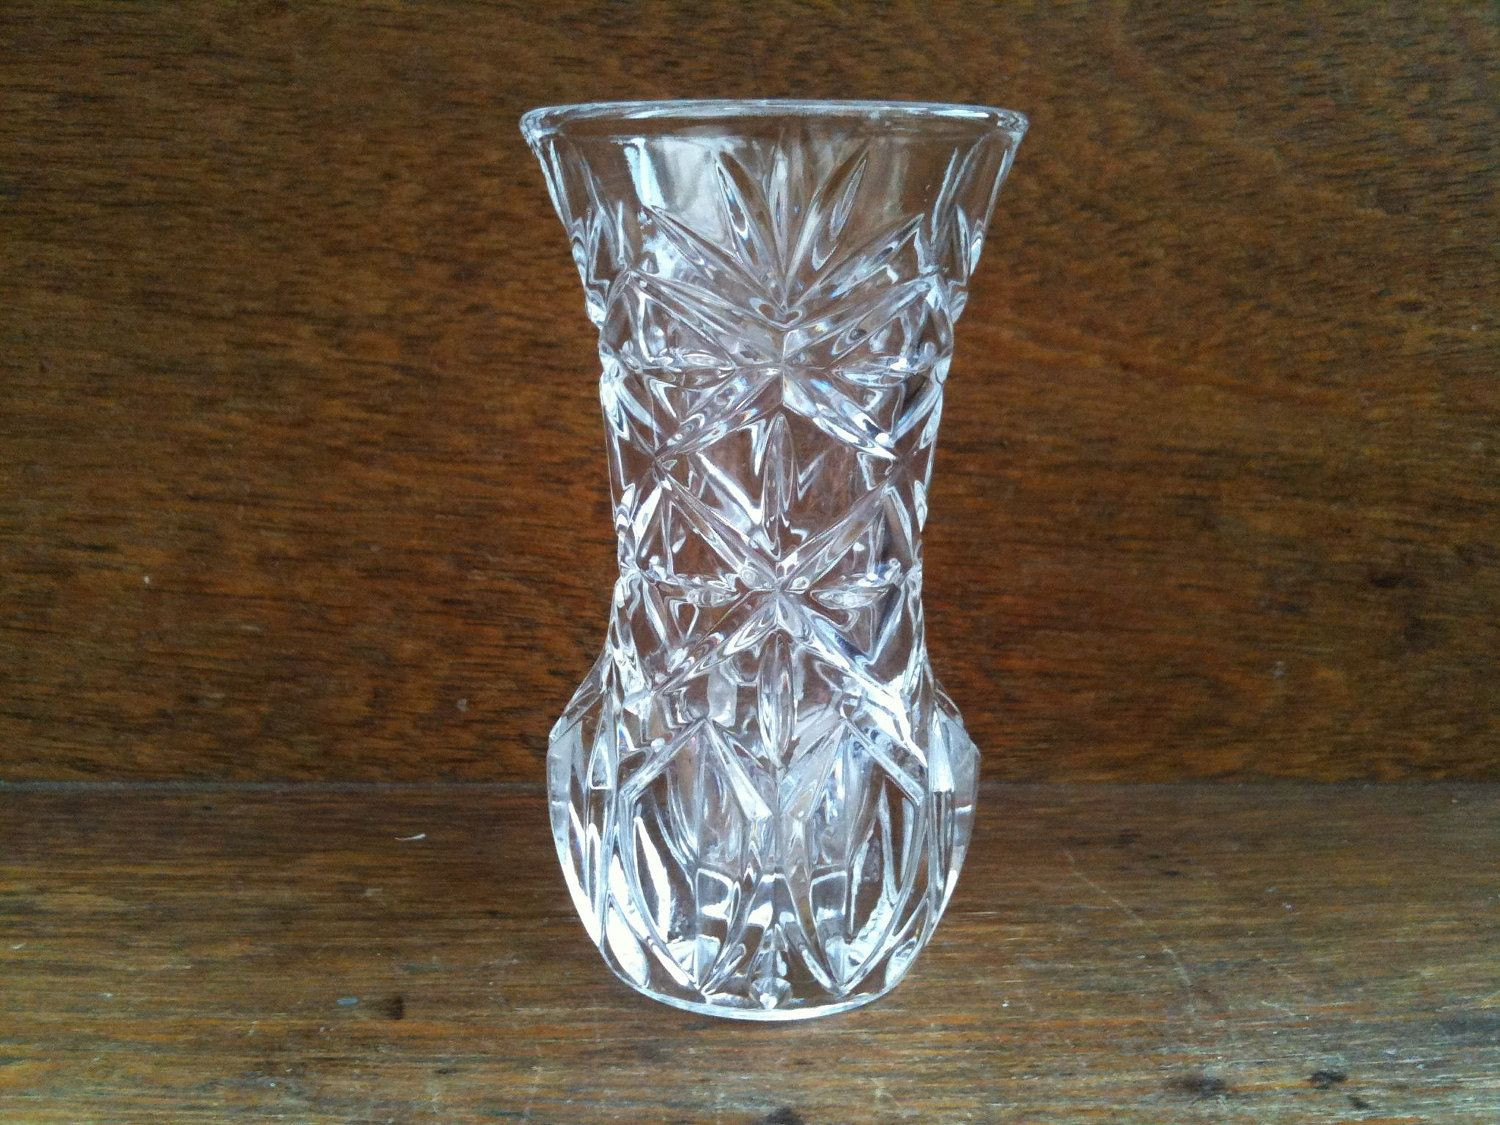 11 Lovable Thick Heavy Glass Vases 2022 free download thick heavy glass vases of vintage english small bud lead crystal glass vase circa 1950s with regard to vintage english small bud lead crystal glass vase circa 1950s purchase in store here h